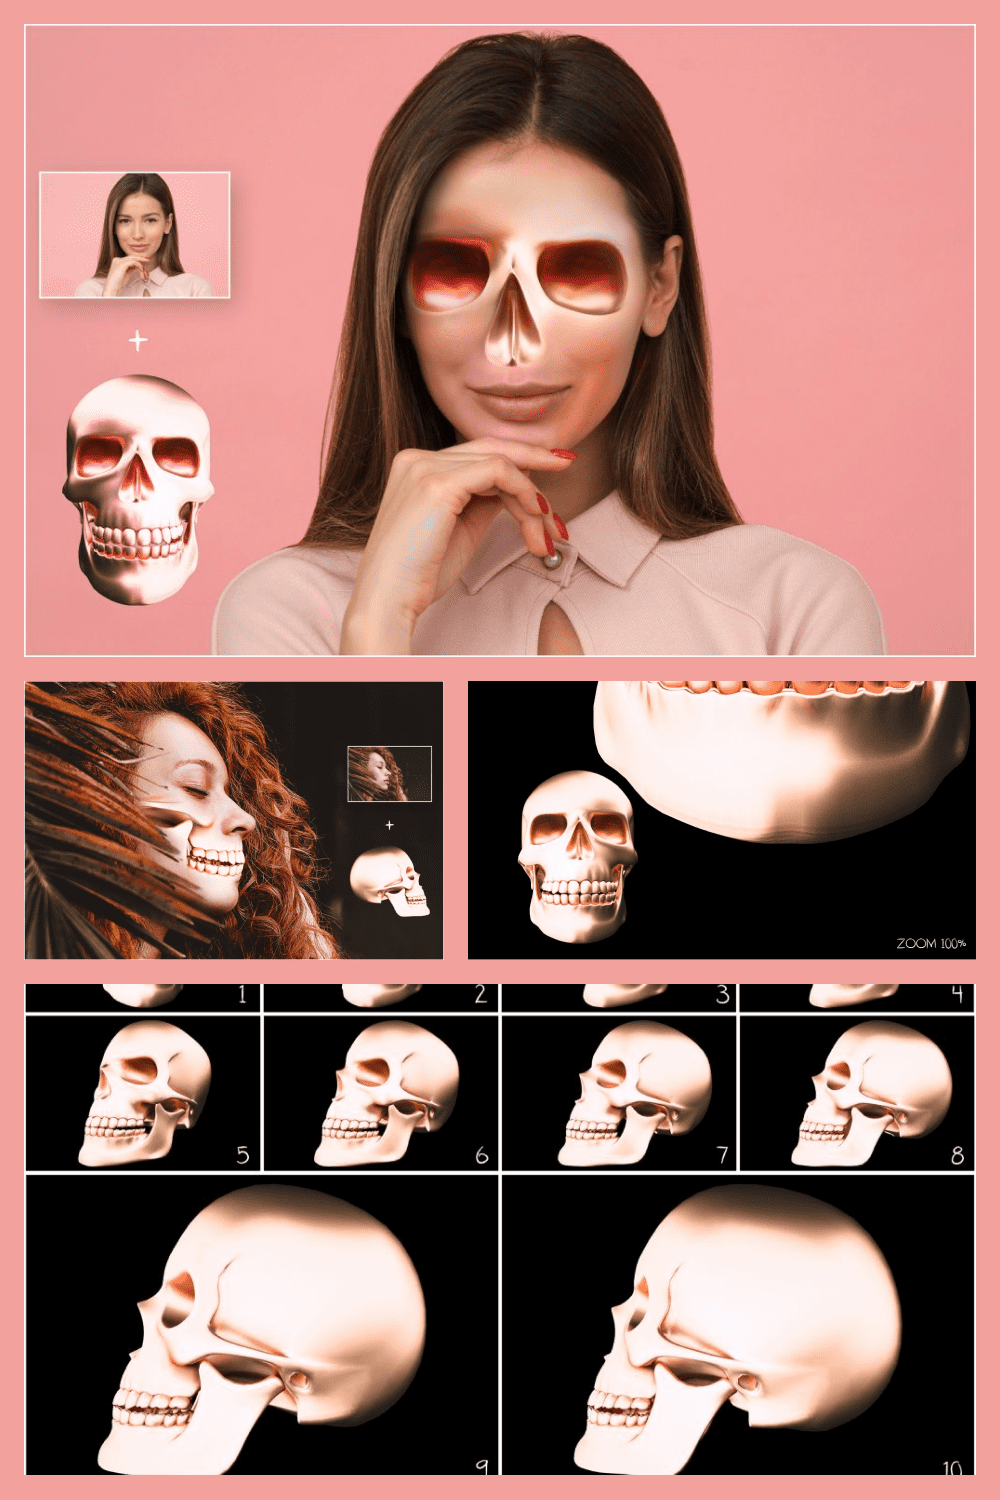 Cool skull effect for photo editing.